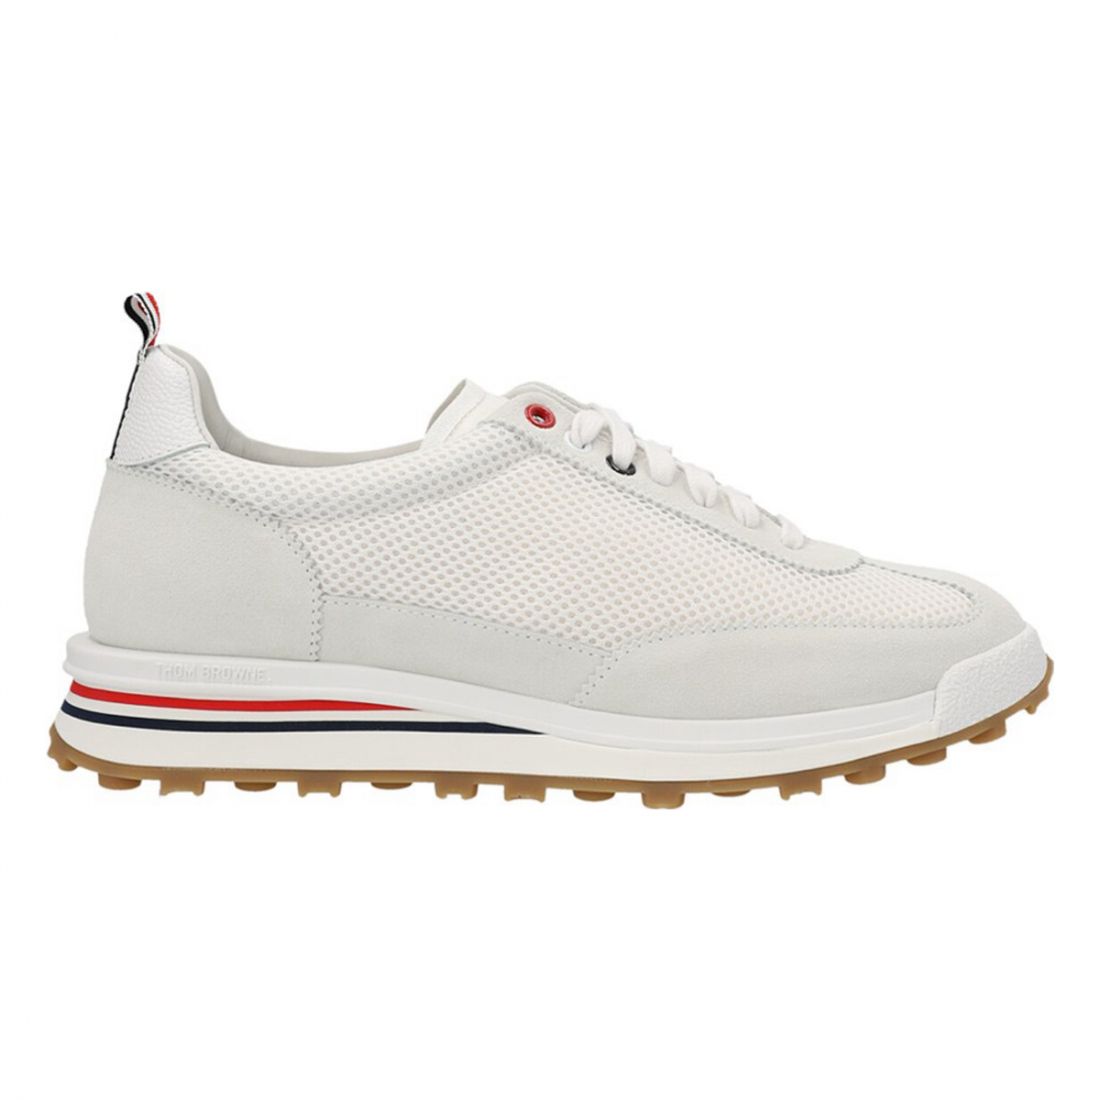 Thom Browne - Sneakers 'Tech Runner' pour Hommes